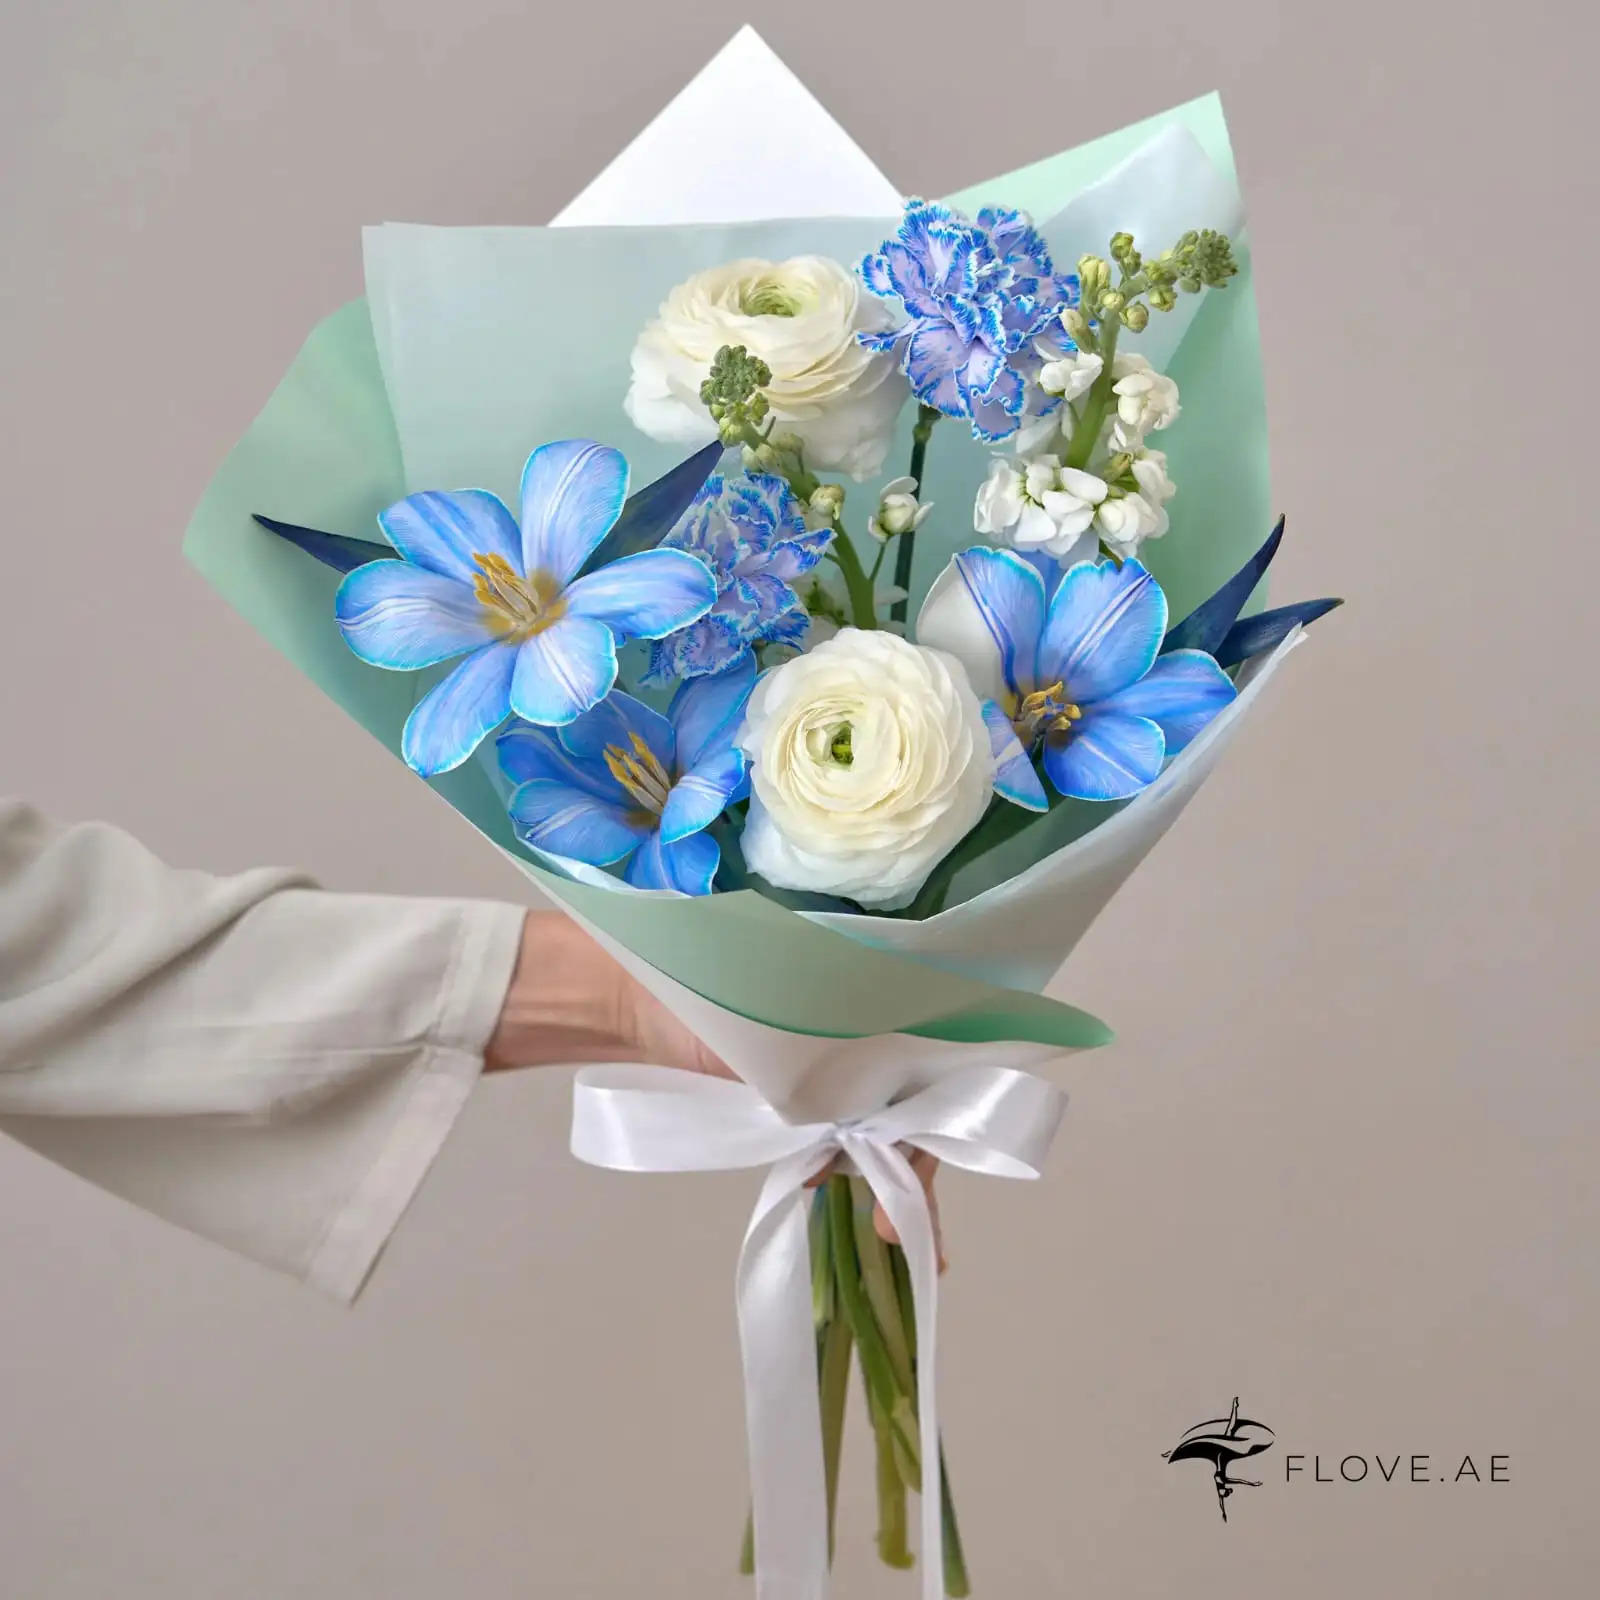 how to surprise your loved one with a bouquet without understanding trends.